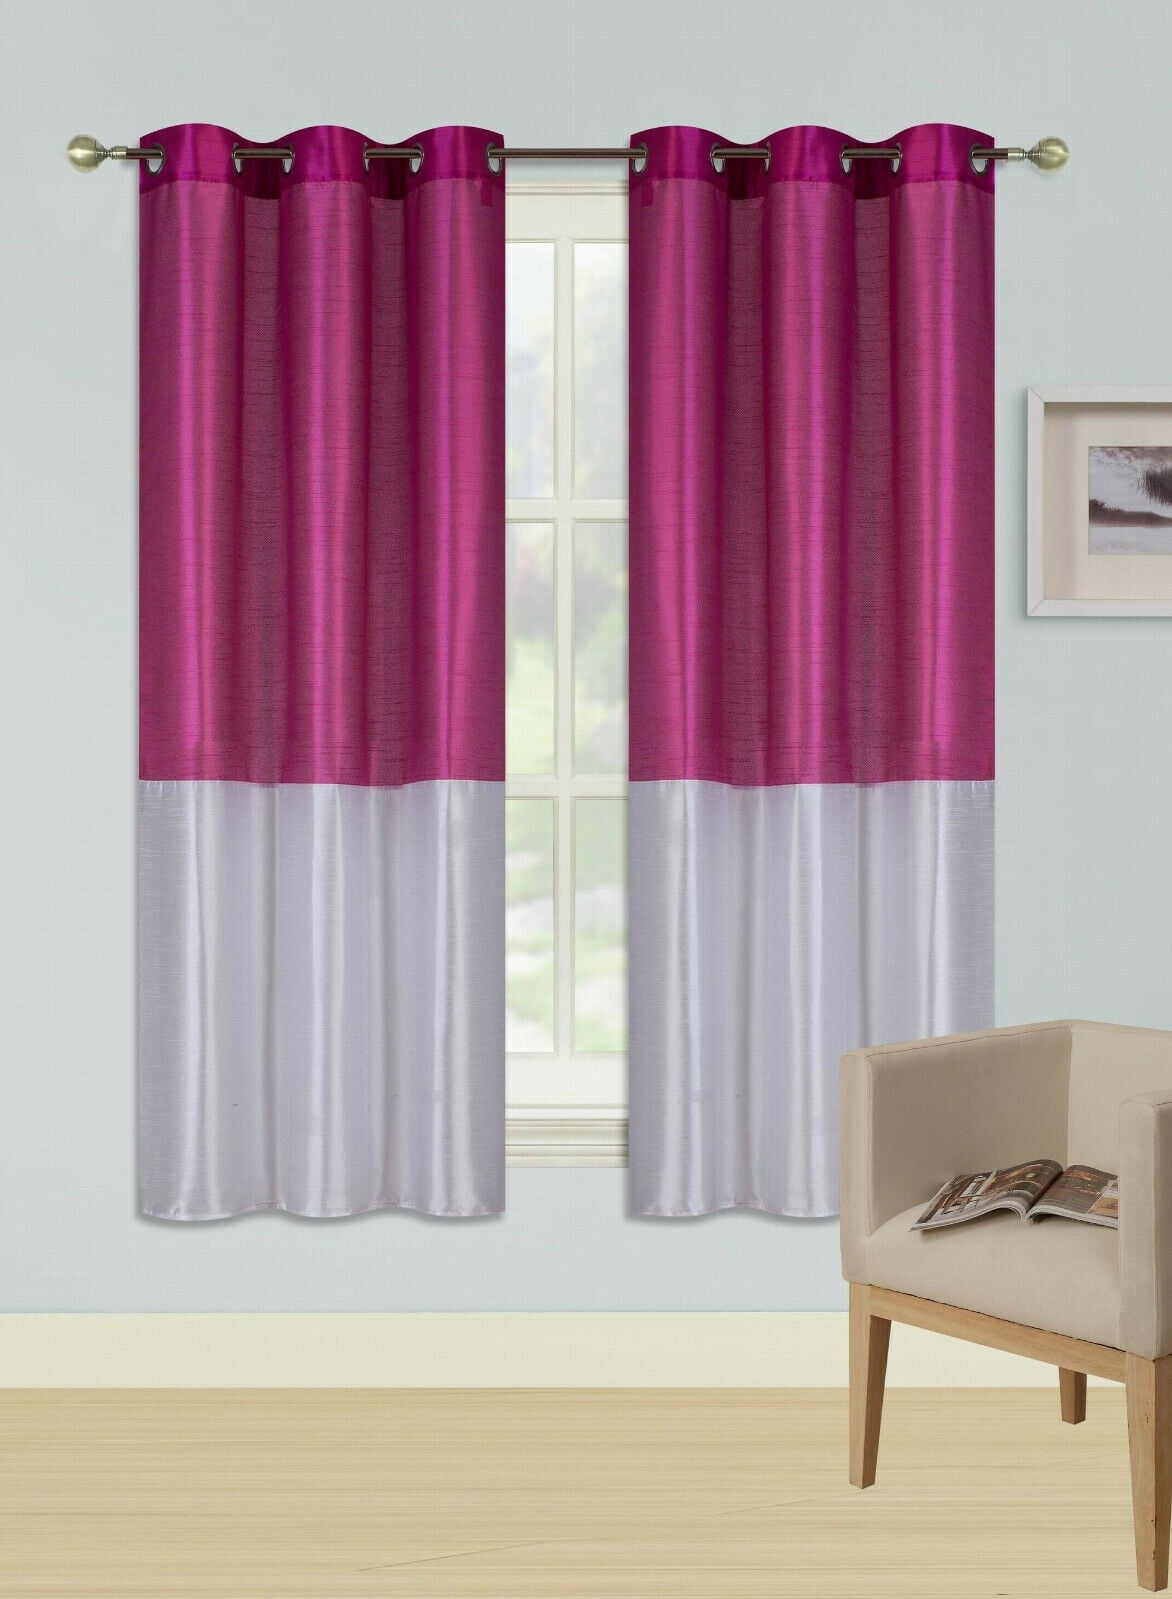 2PC HOT PINK WHITE EID 2 SHADES Insulated Blackout Window Curtain Panels 